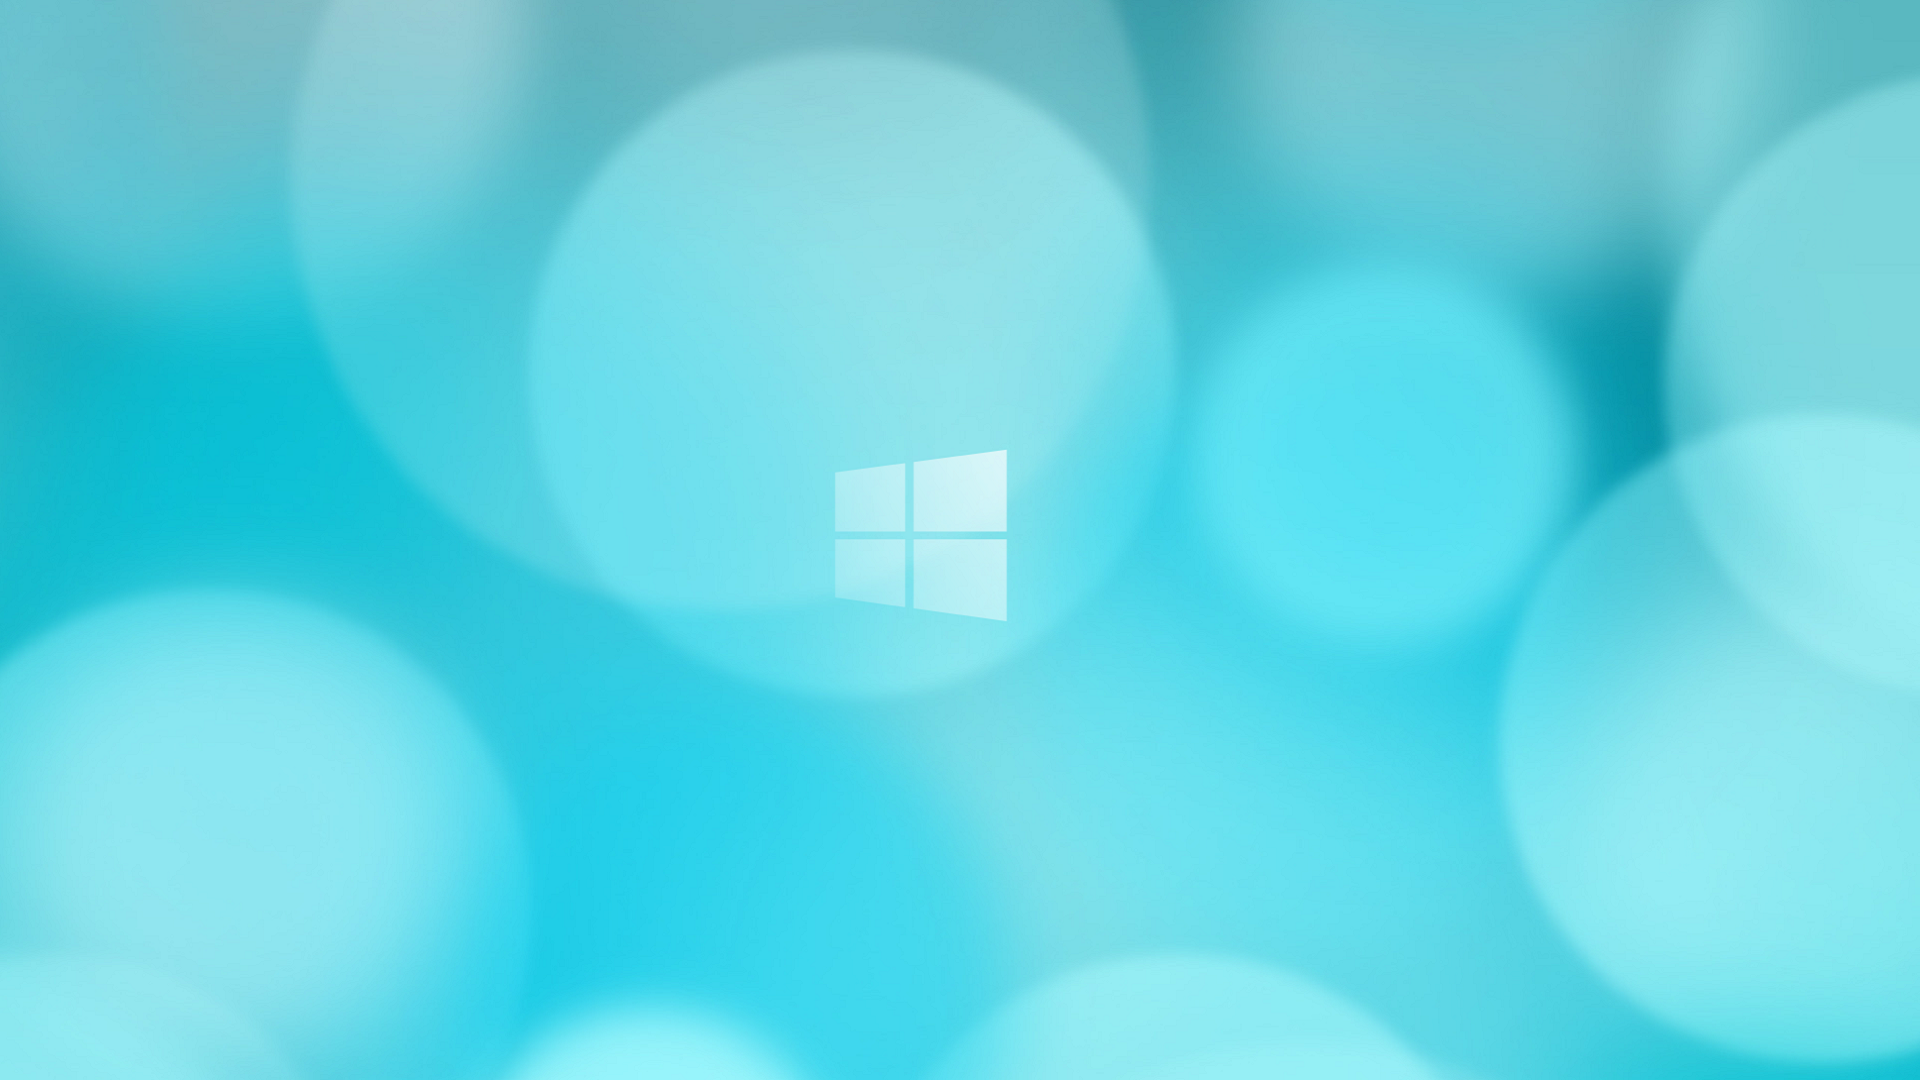 Blue Windows Themes Wallpaper Background Wallpaper with 1920x1080